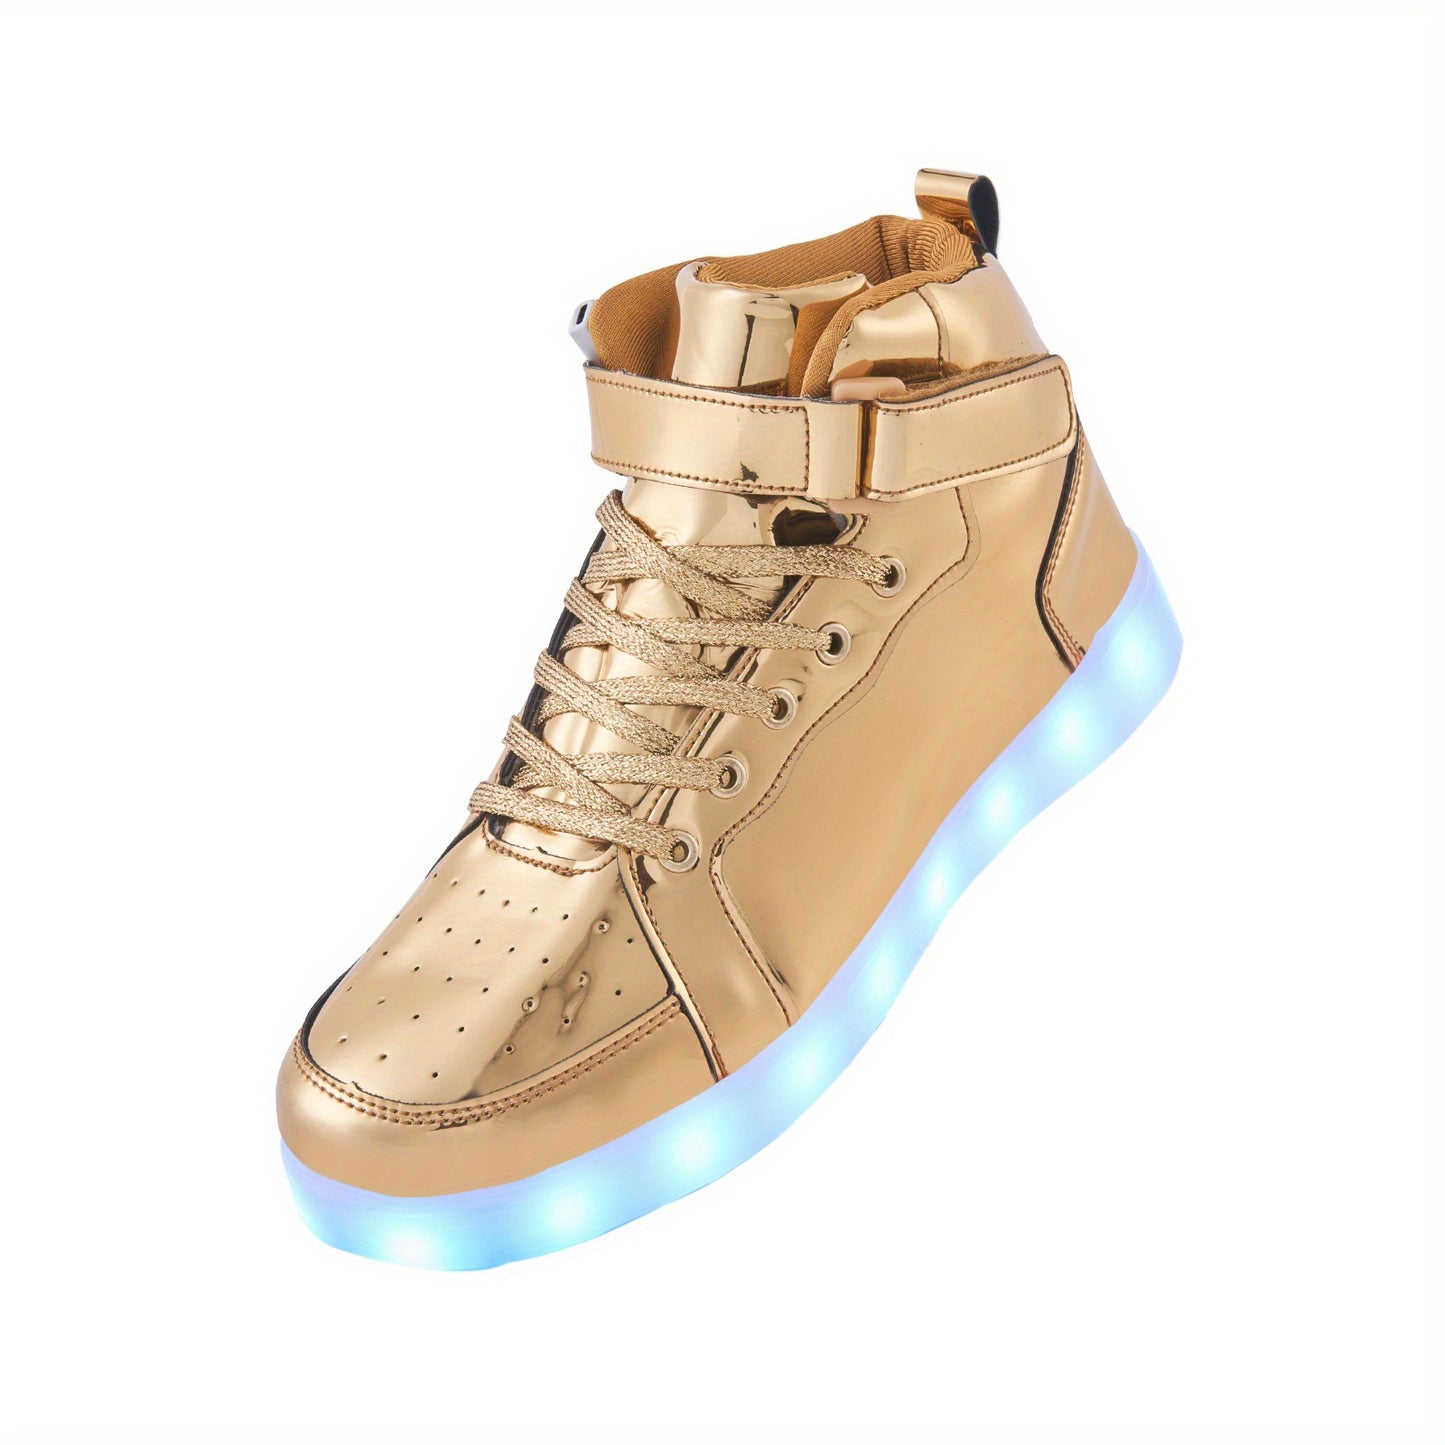 Trendy Led Light Up HighTop Sneakers, USB Charging